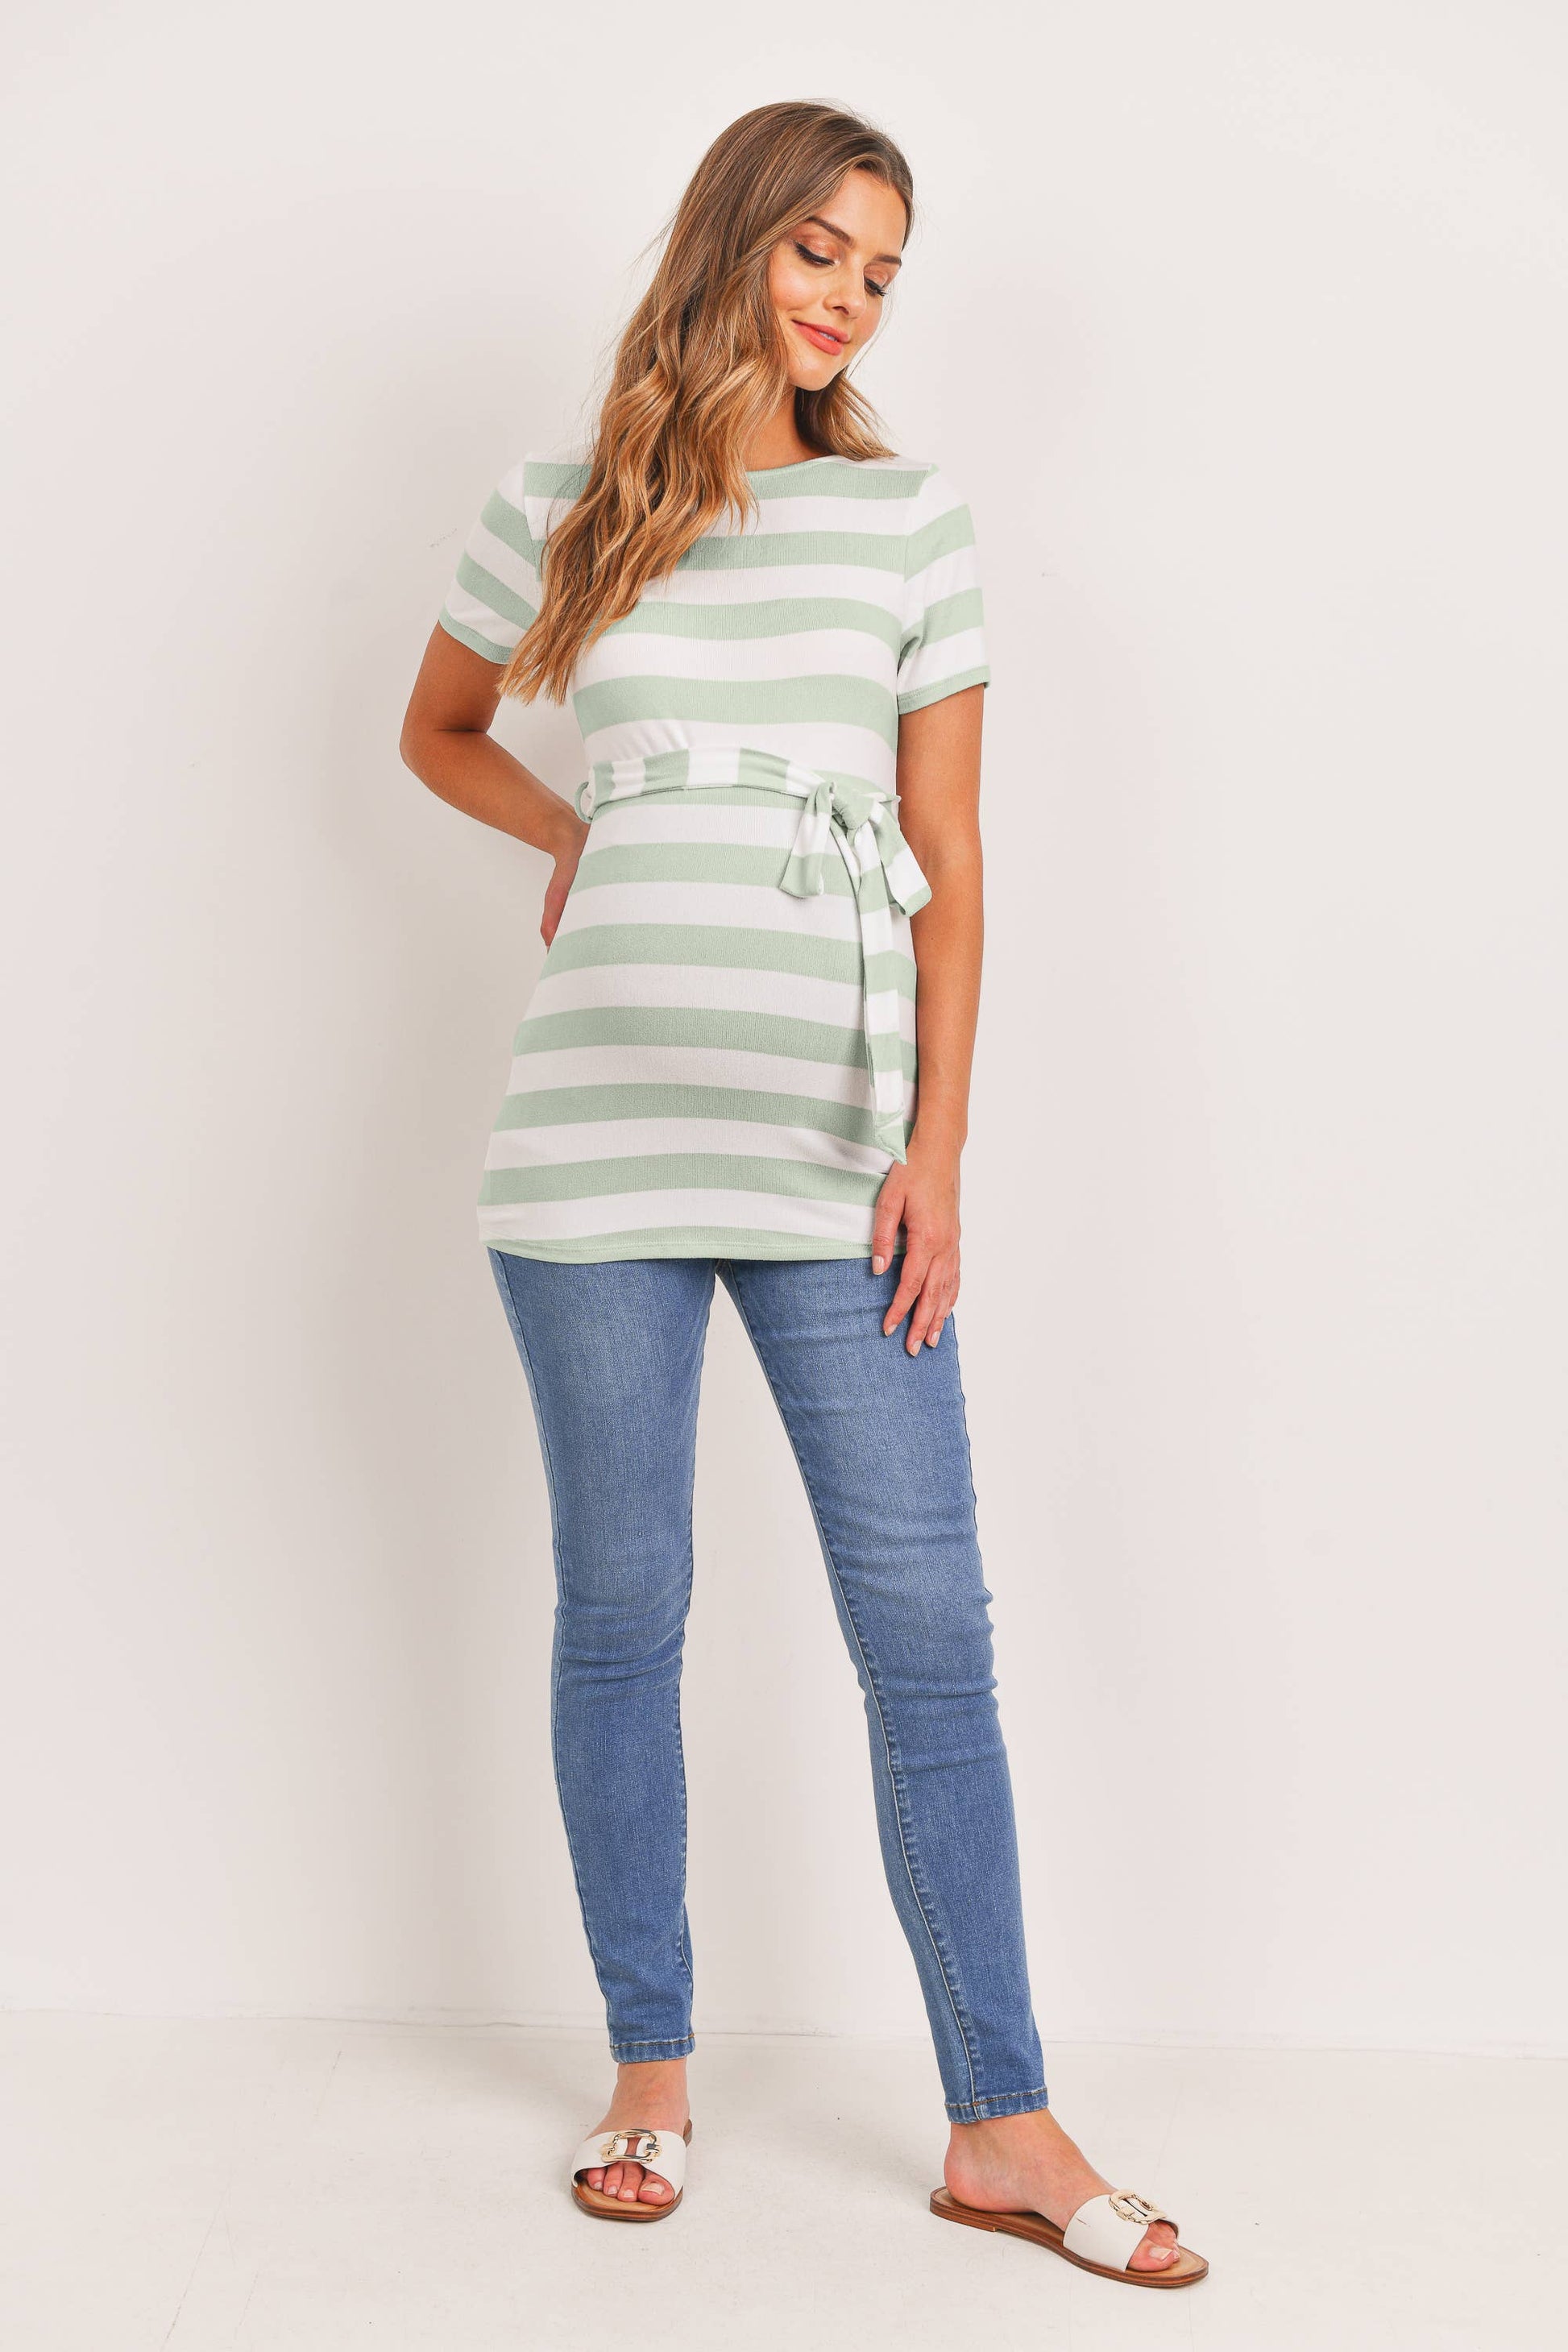 Mint Striped Maternity Tunic with Tie  - Doodlebug's Children's Boutique